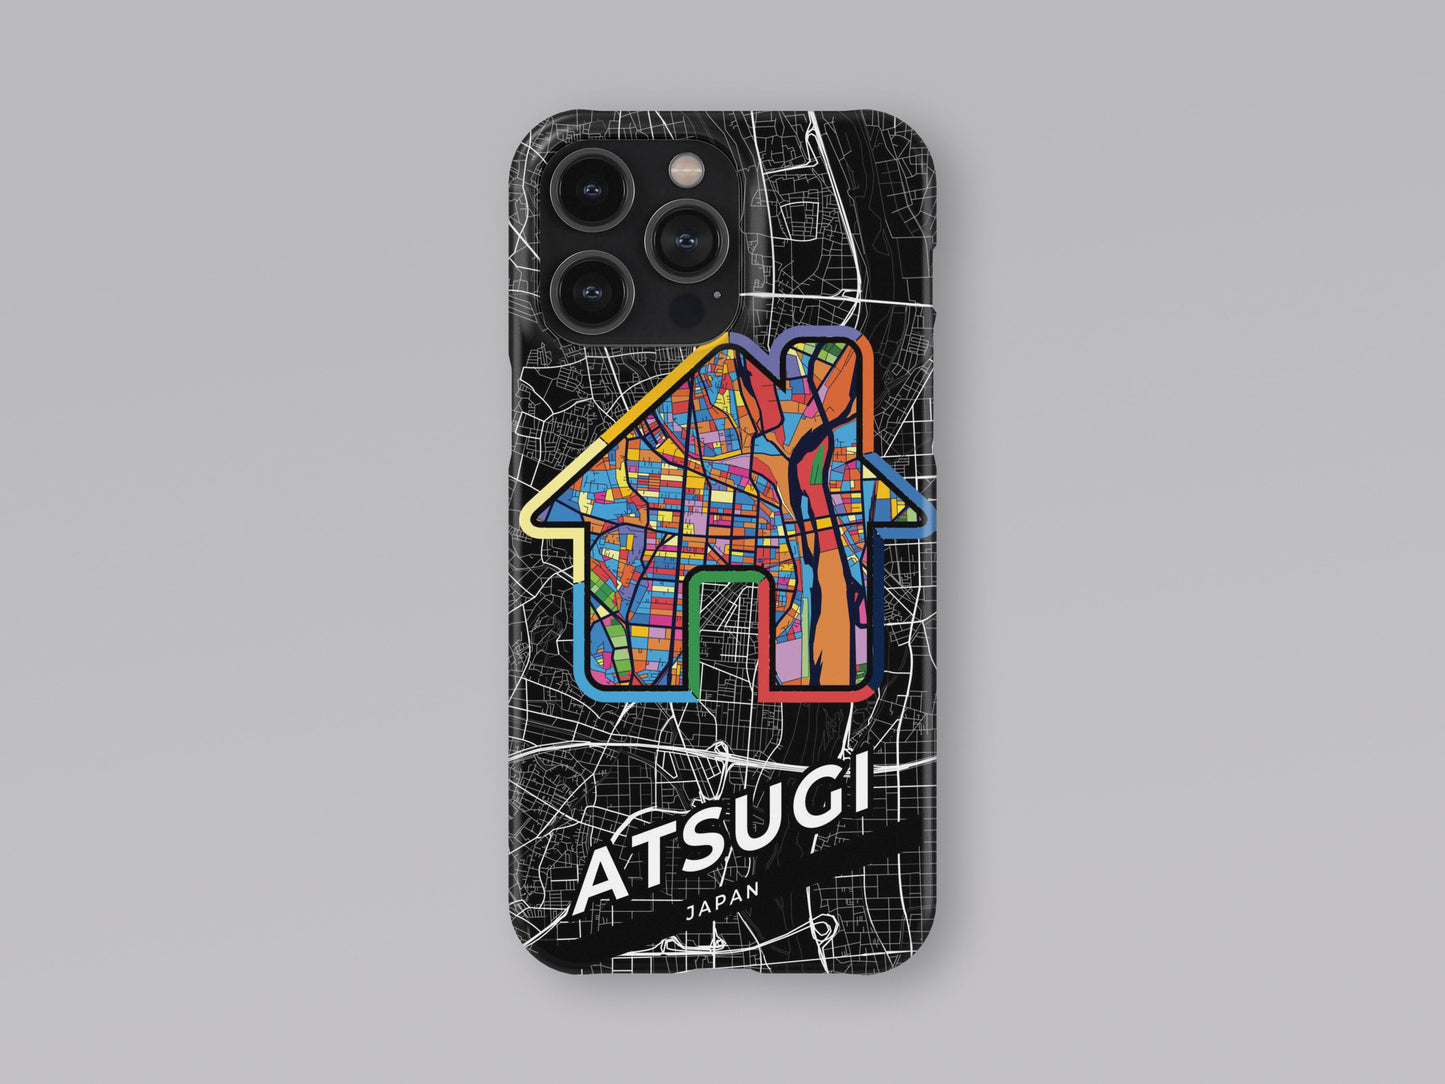 Atsugi Japan slim phone case with colorful icon. Birthday, wedding or housewarming gift. Couple match cases. 3